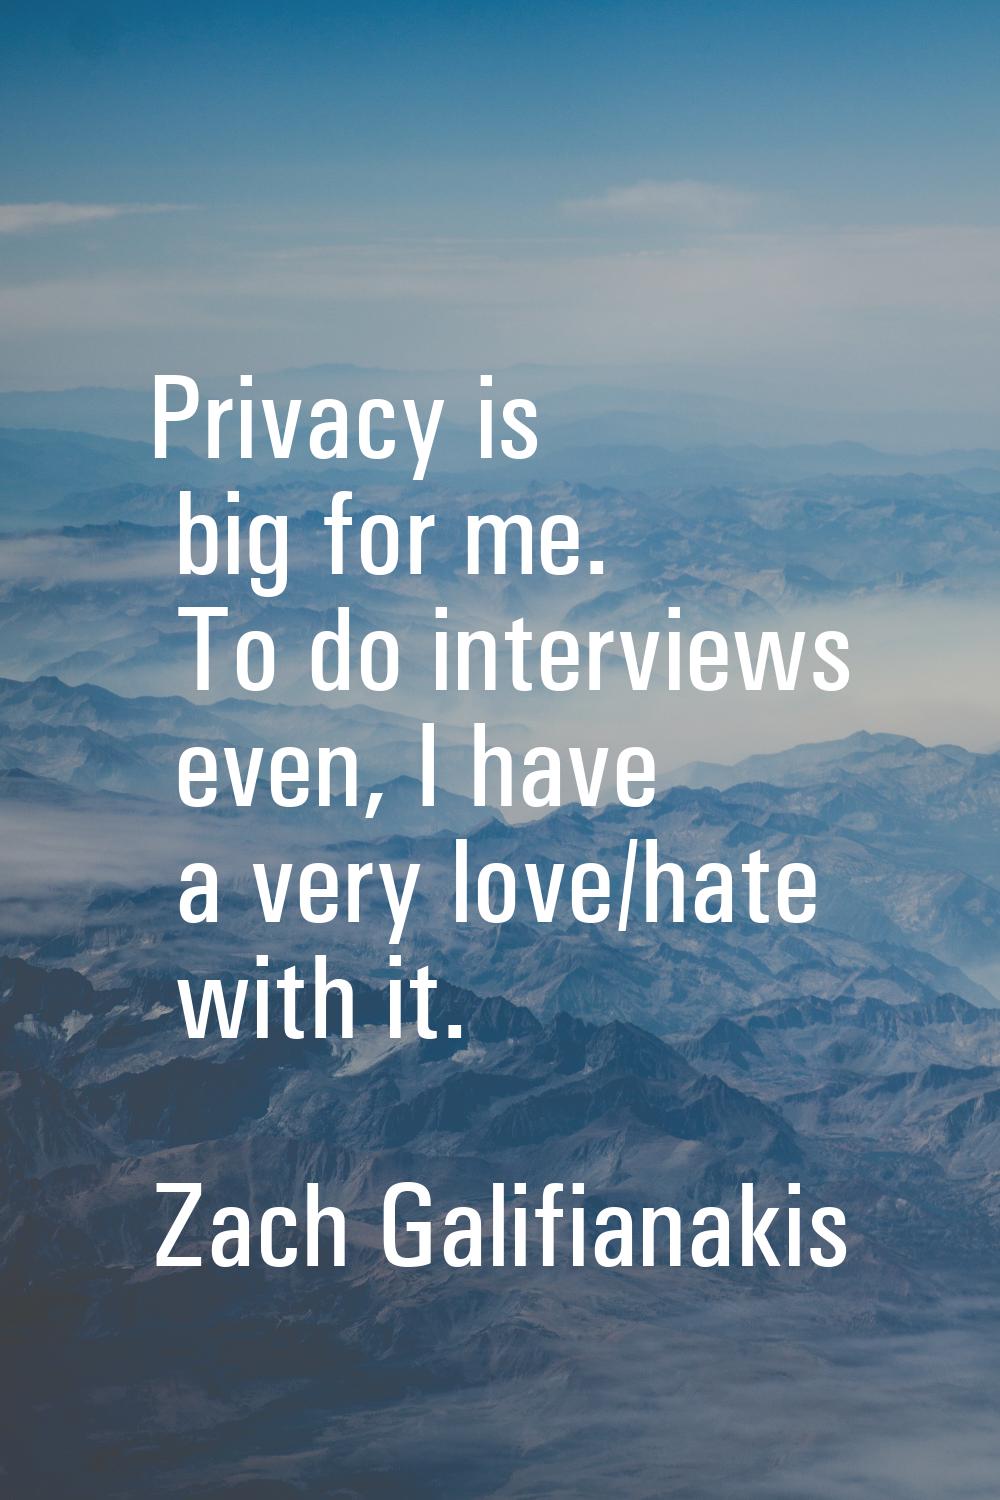 Privacy is big for me. To do interviews even, I have a very love/hate with it.